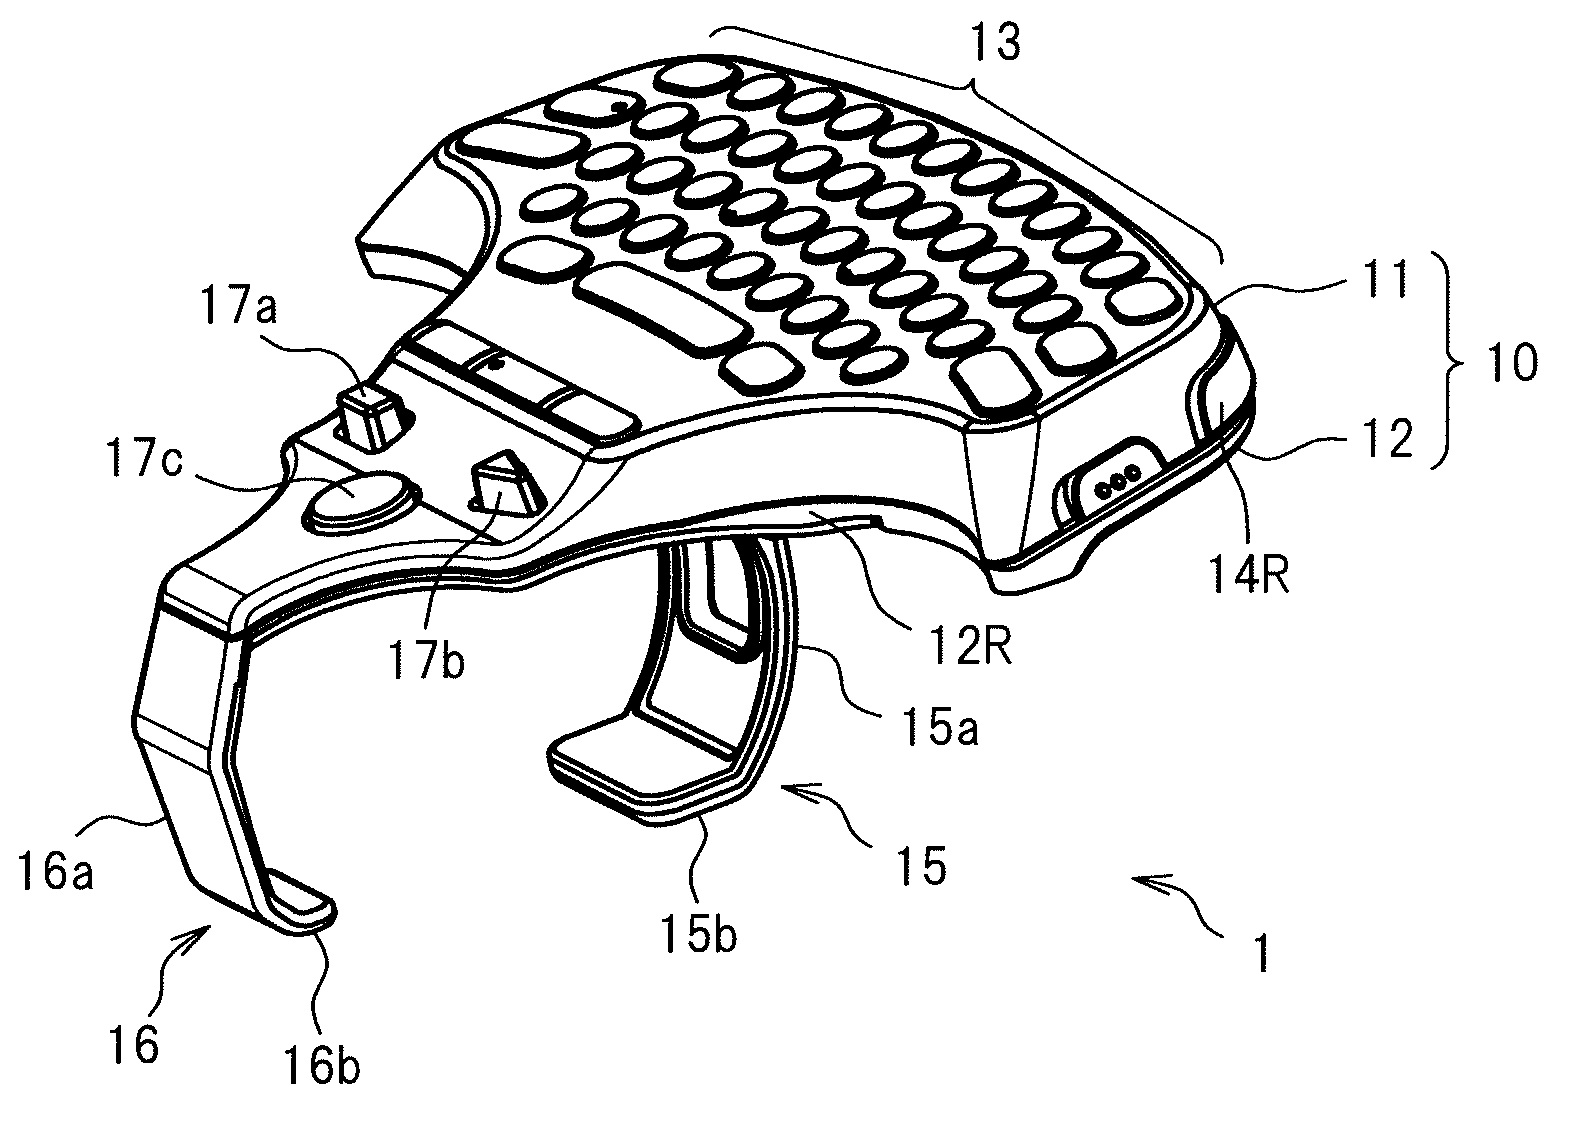 Operation input device and character input device